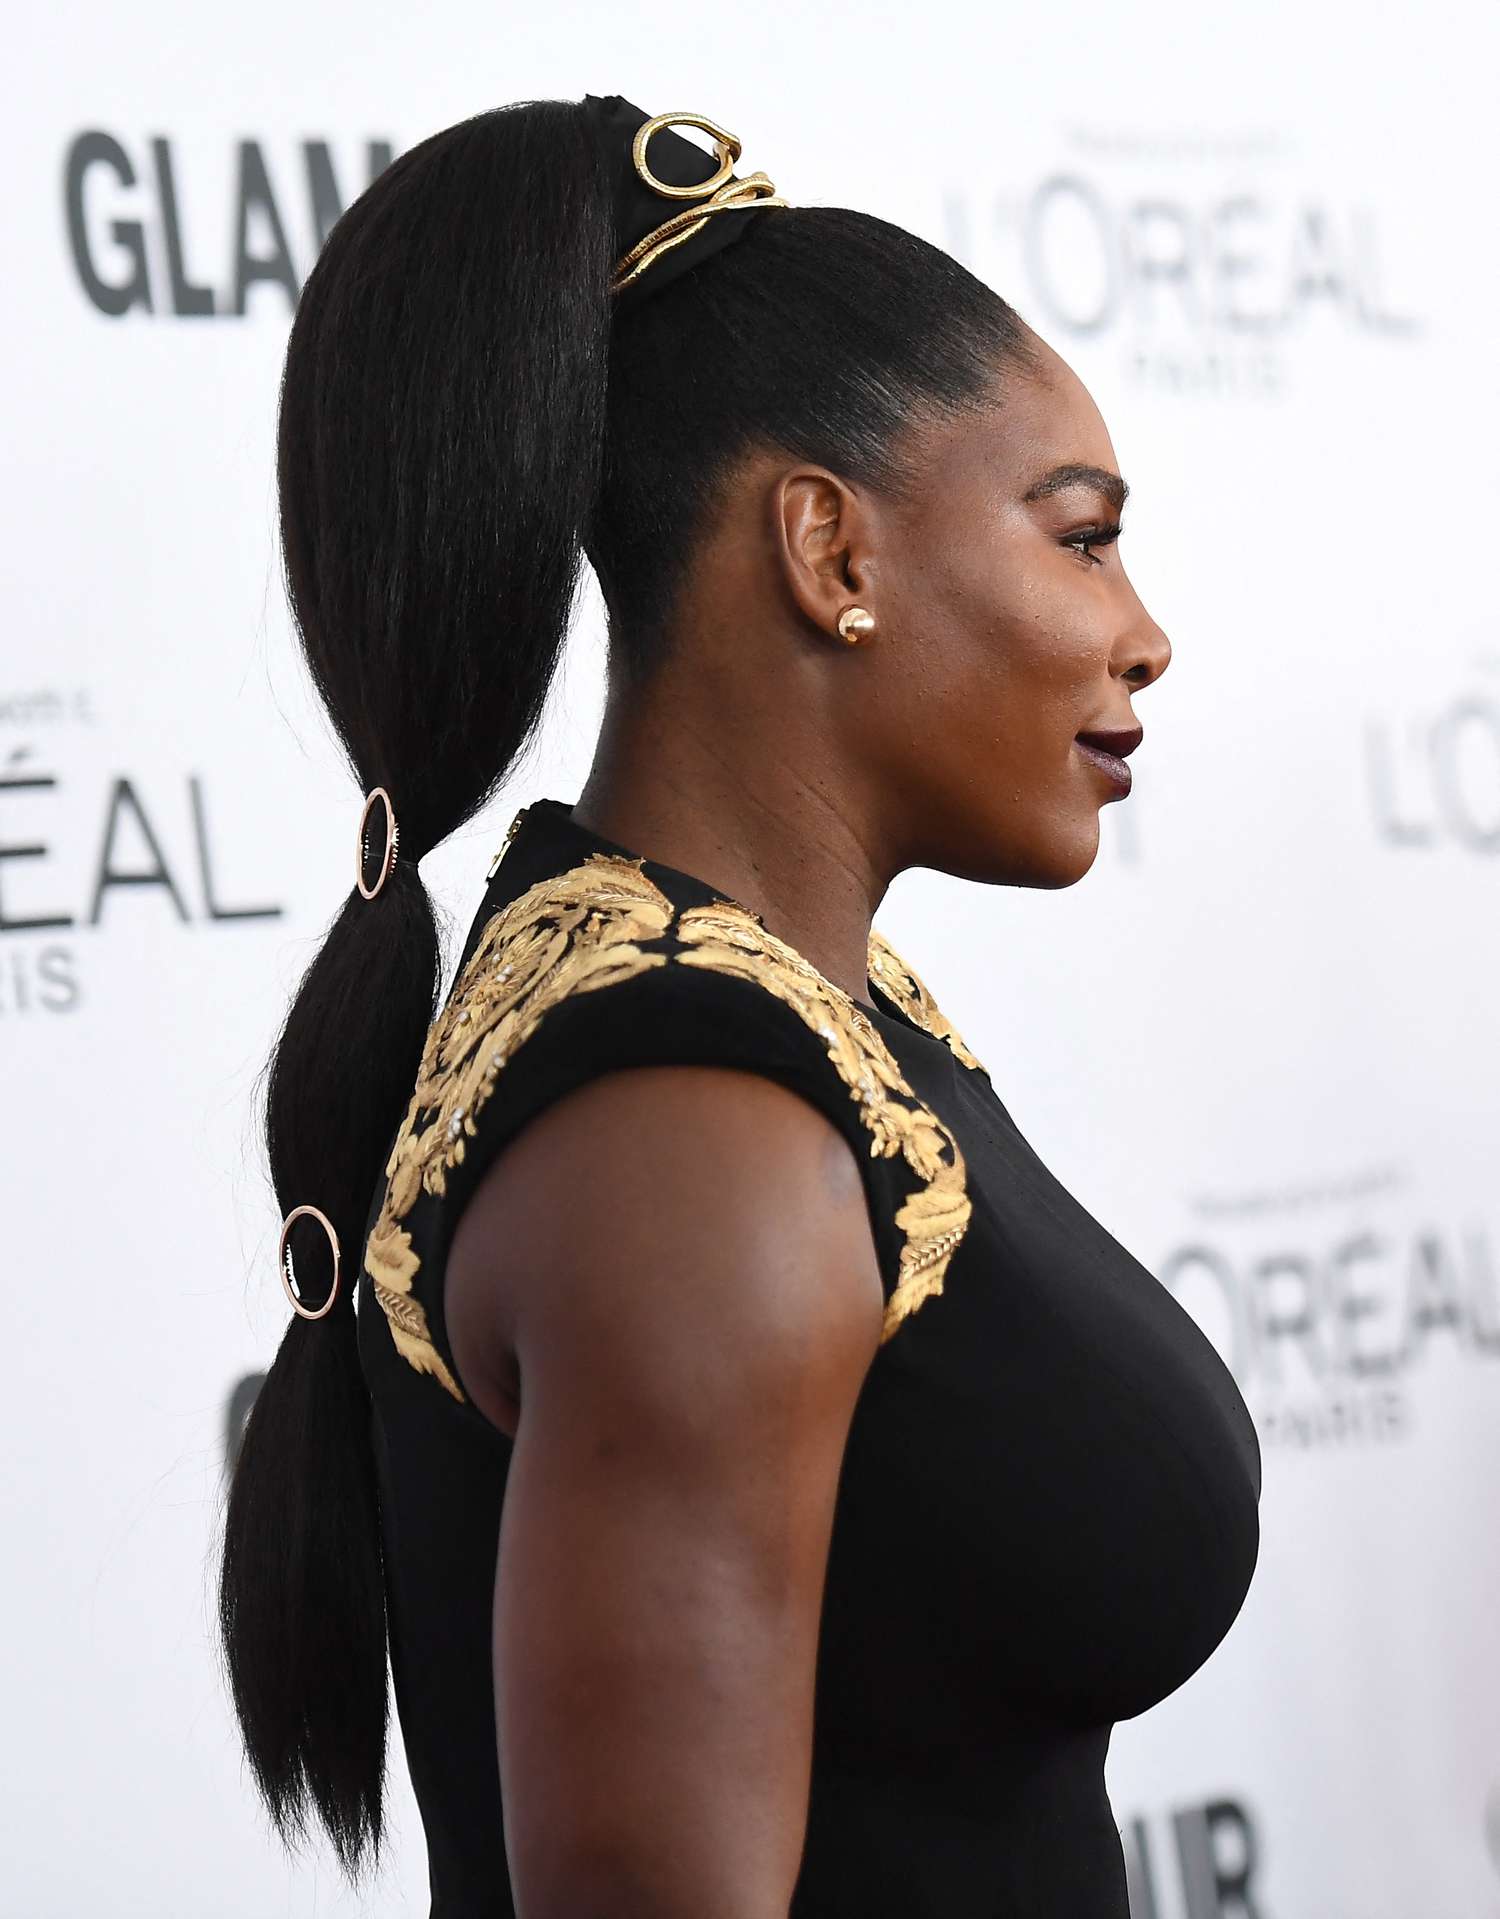 Serena Williams with a high bubble ponytail with gold accessories